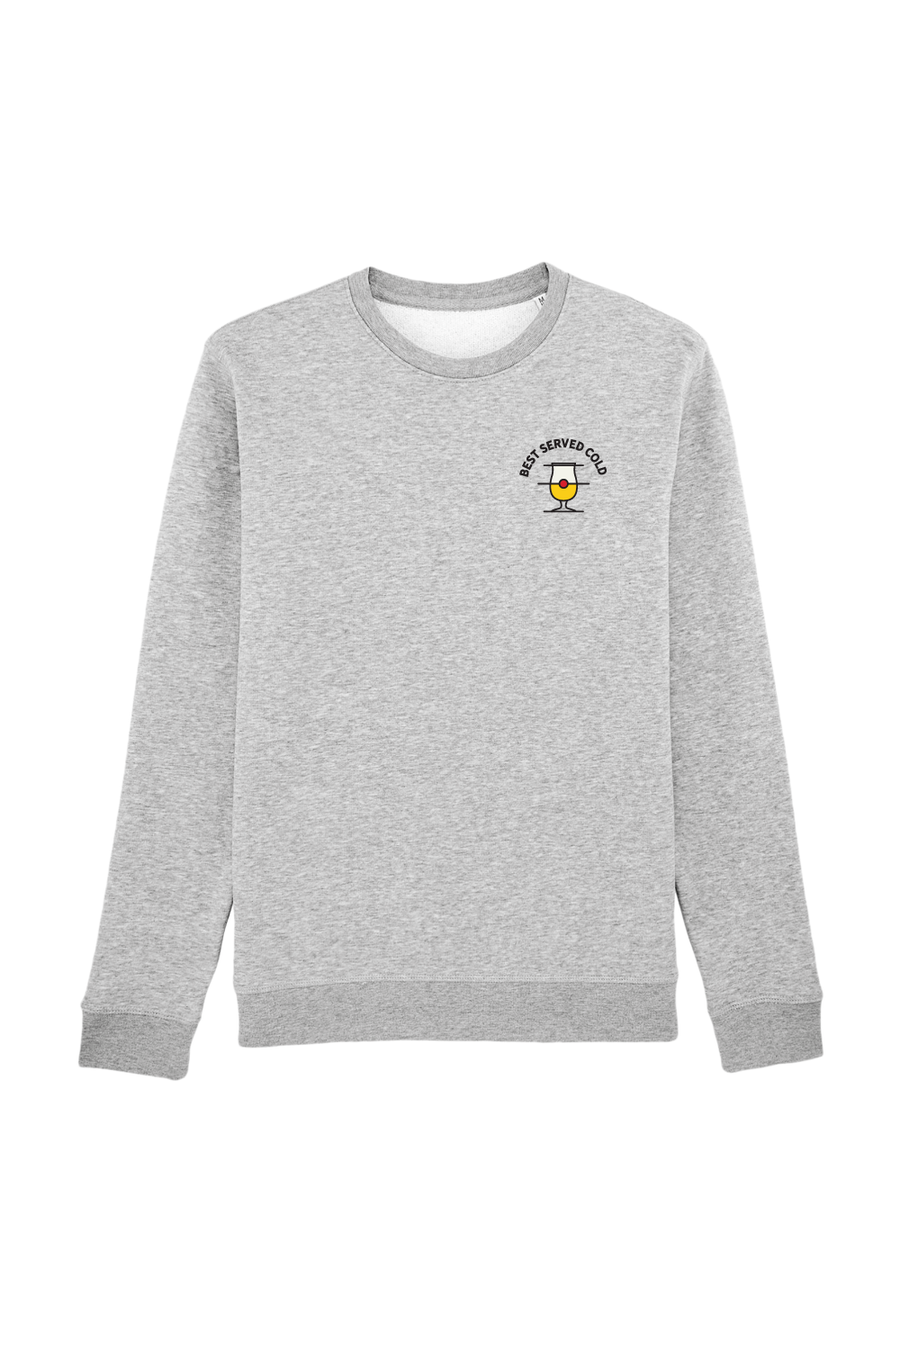 Best served cold Sweater - Joh Clothing